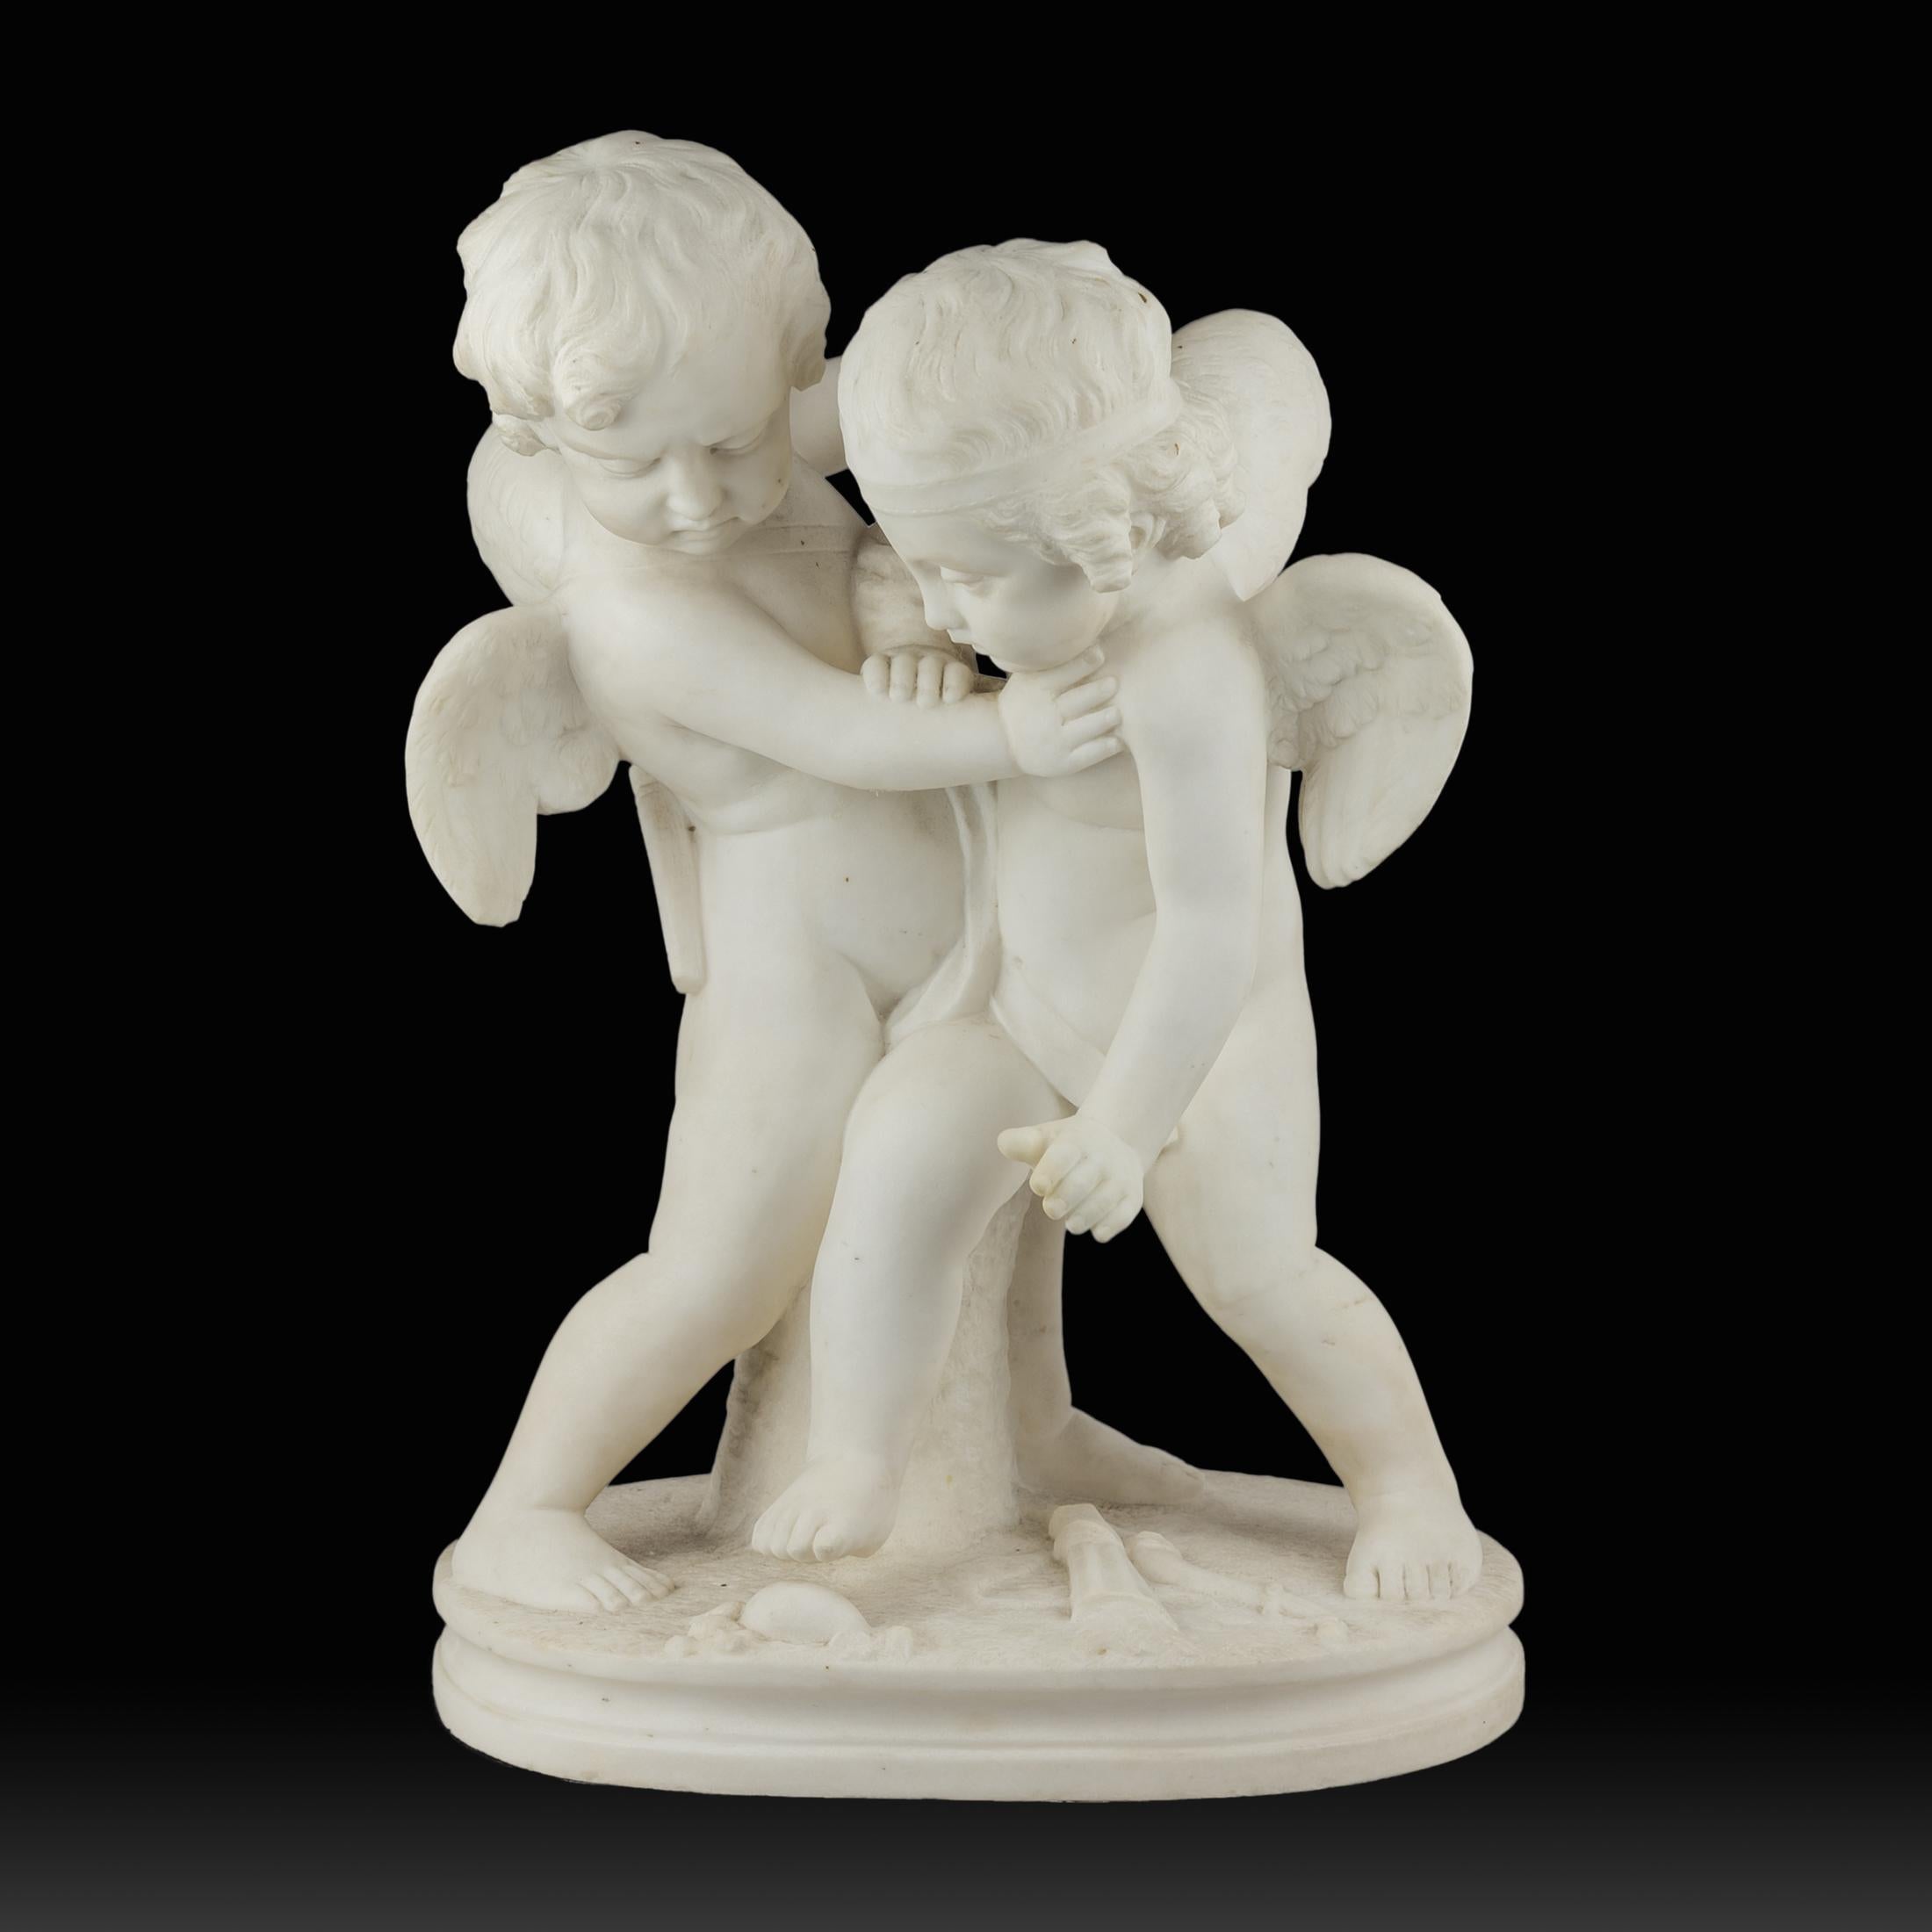 White Marble Sculpture Statue of Two Cherubs Playing